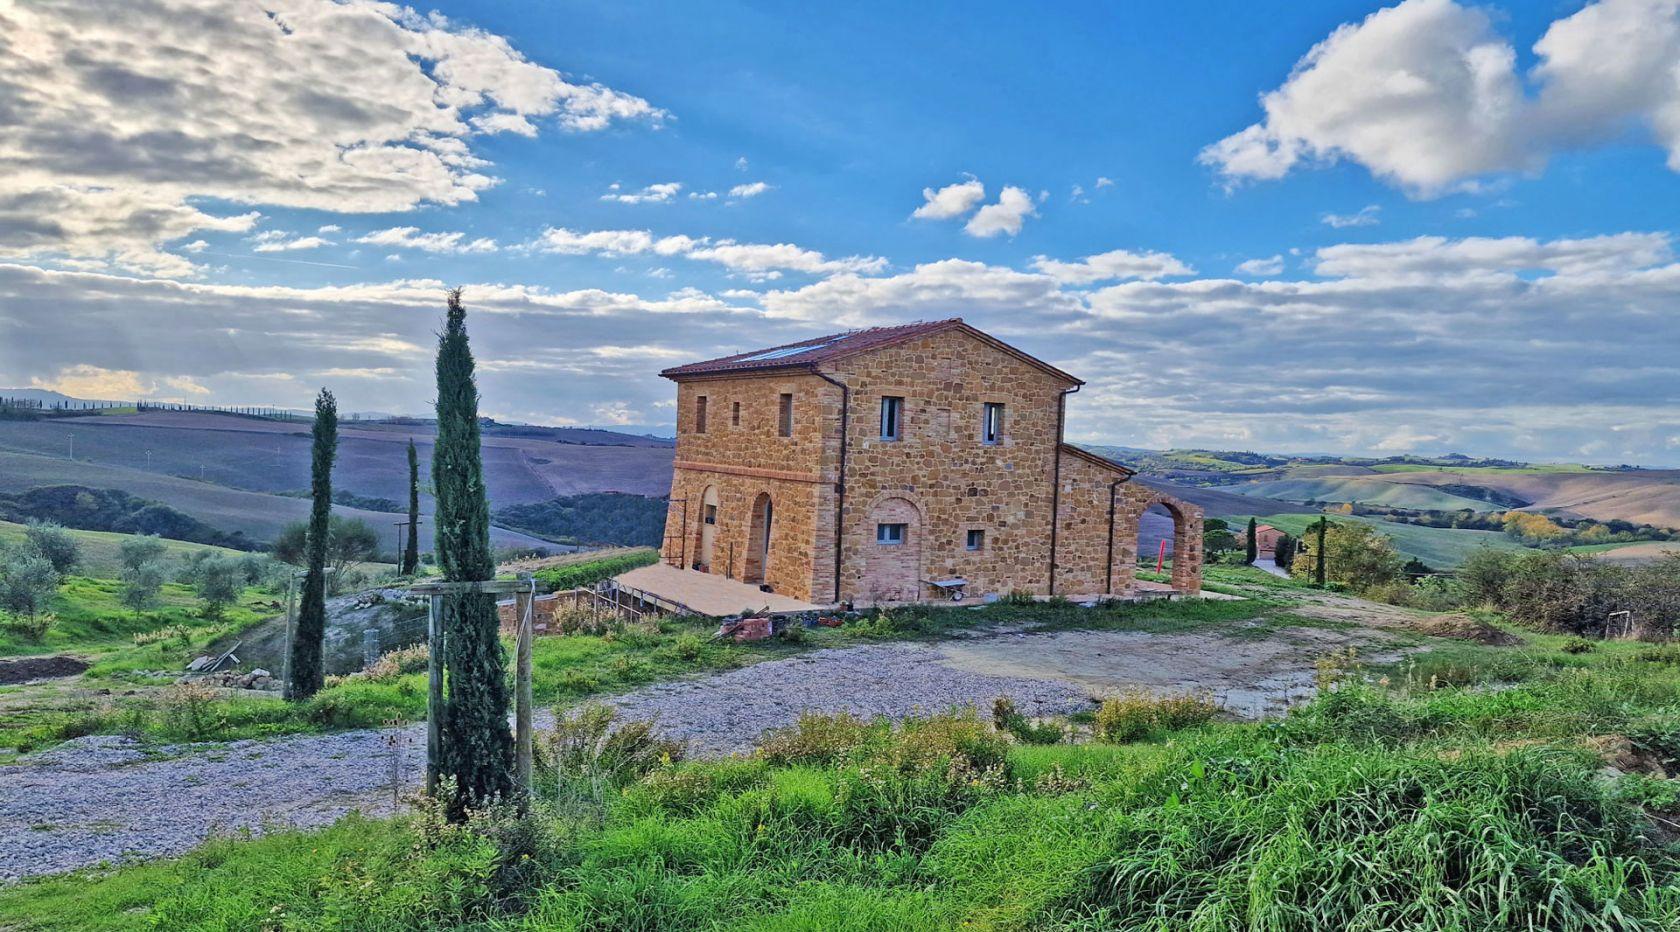 Toscana Immobiliare - Montalcino, in a dominant position on the hillside, surrounded by the verdant Tuscan countryside and the characteristic Crete Senesi, renowned for the beauty of its landscapes, this charming farmhouse is for sale.